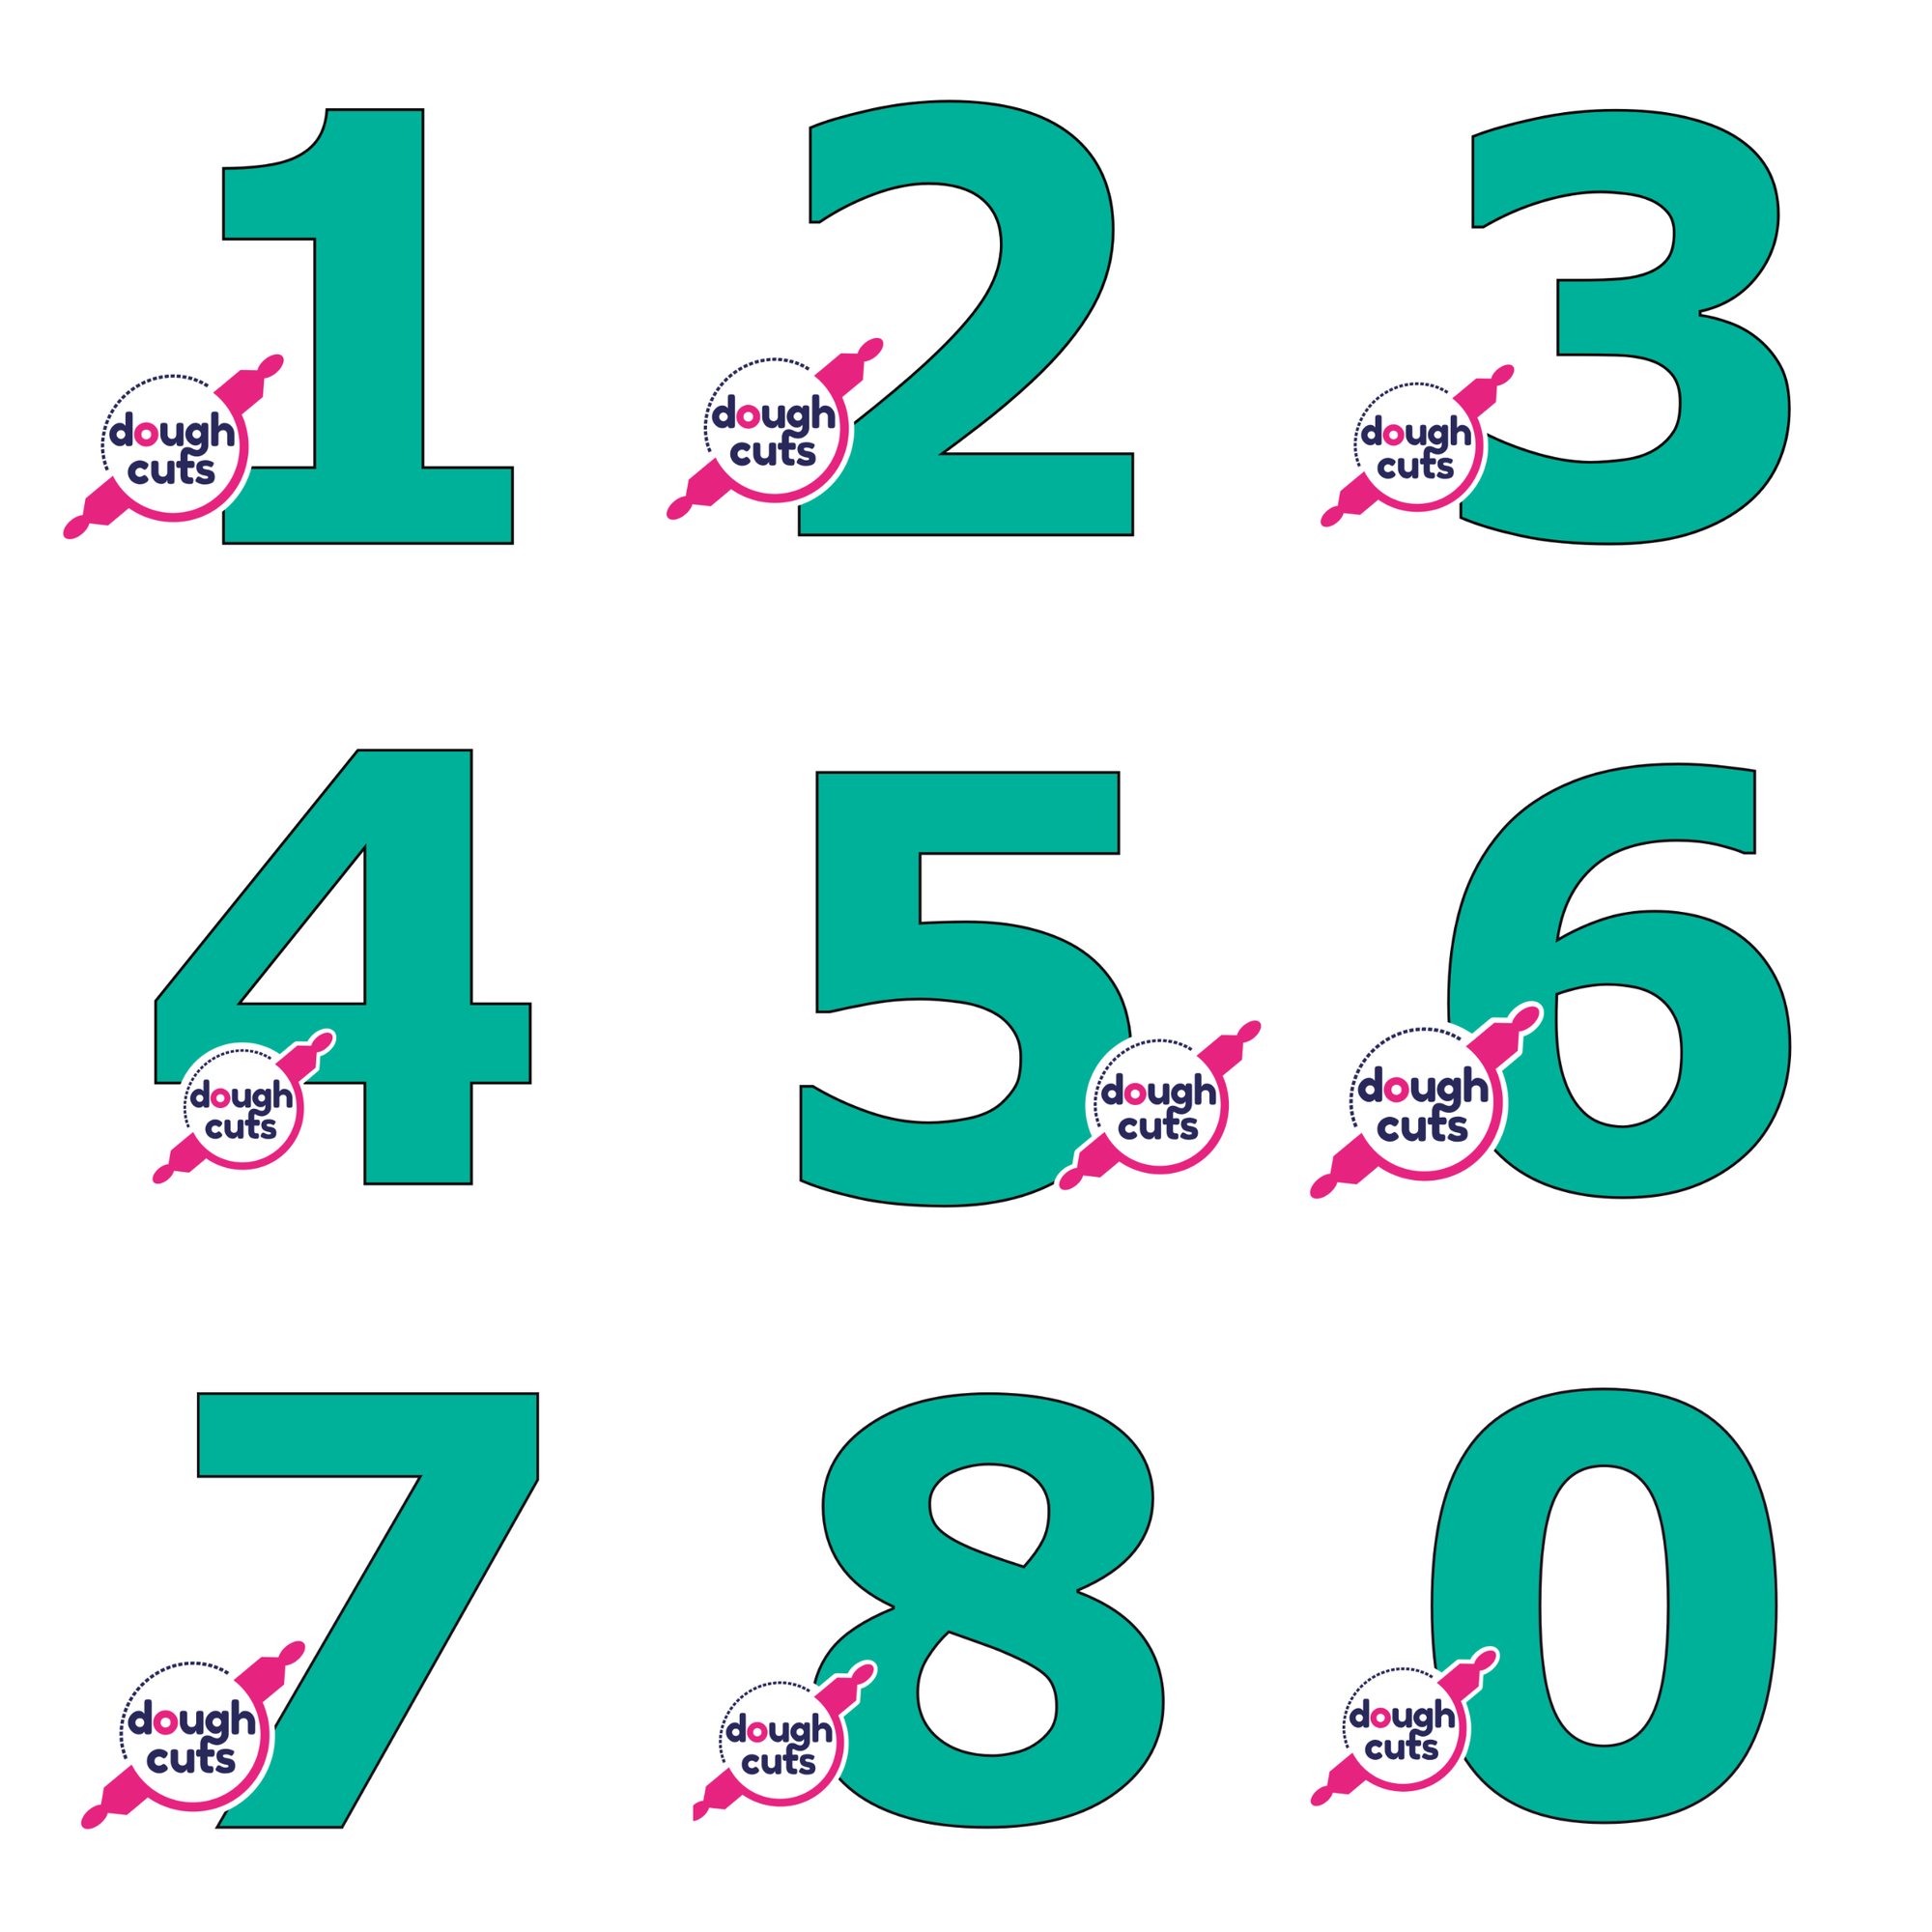 Set of 9 Number Cookie Cake Templates